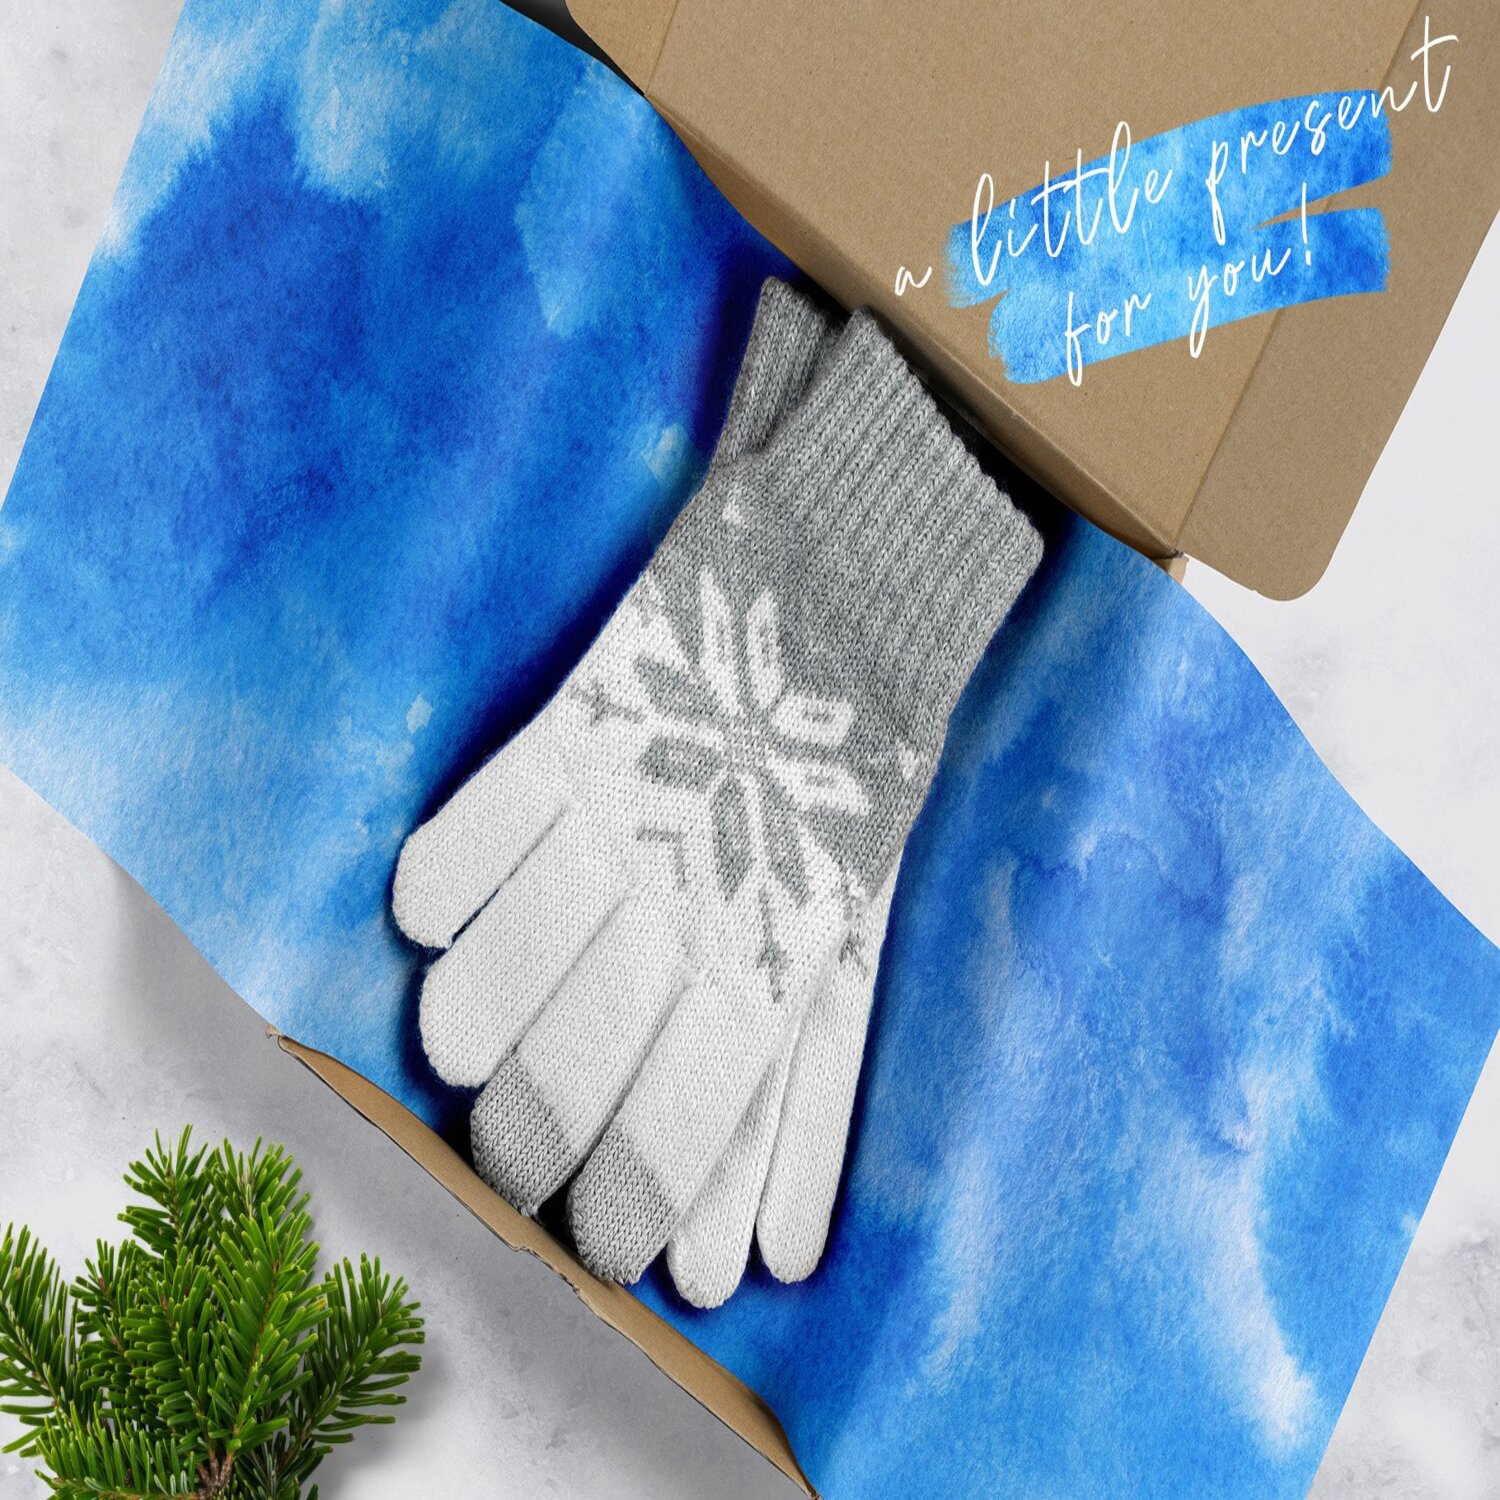 45 Winter Watercolor Backgrounds cover.